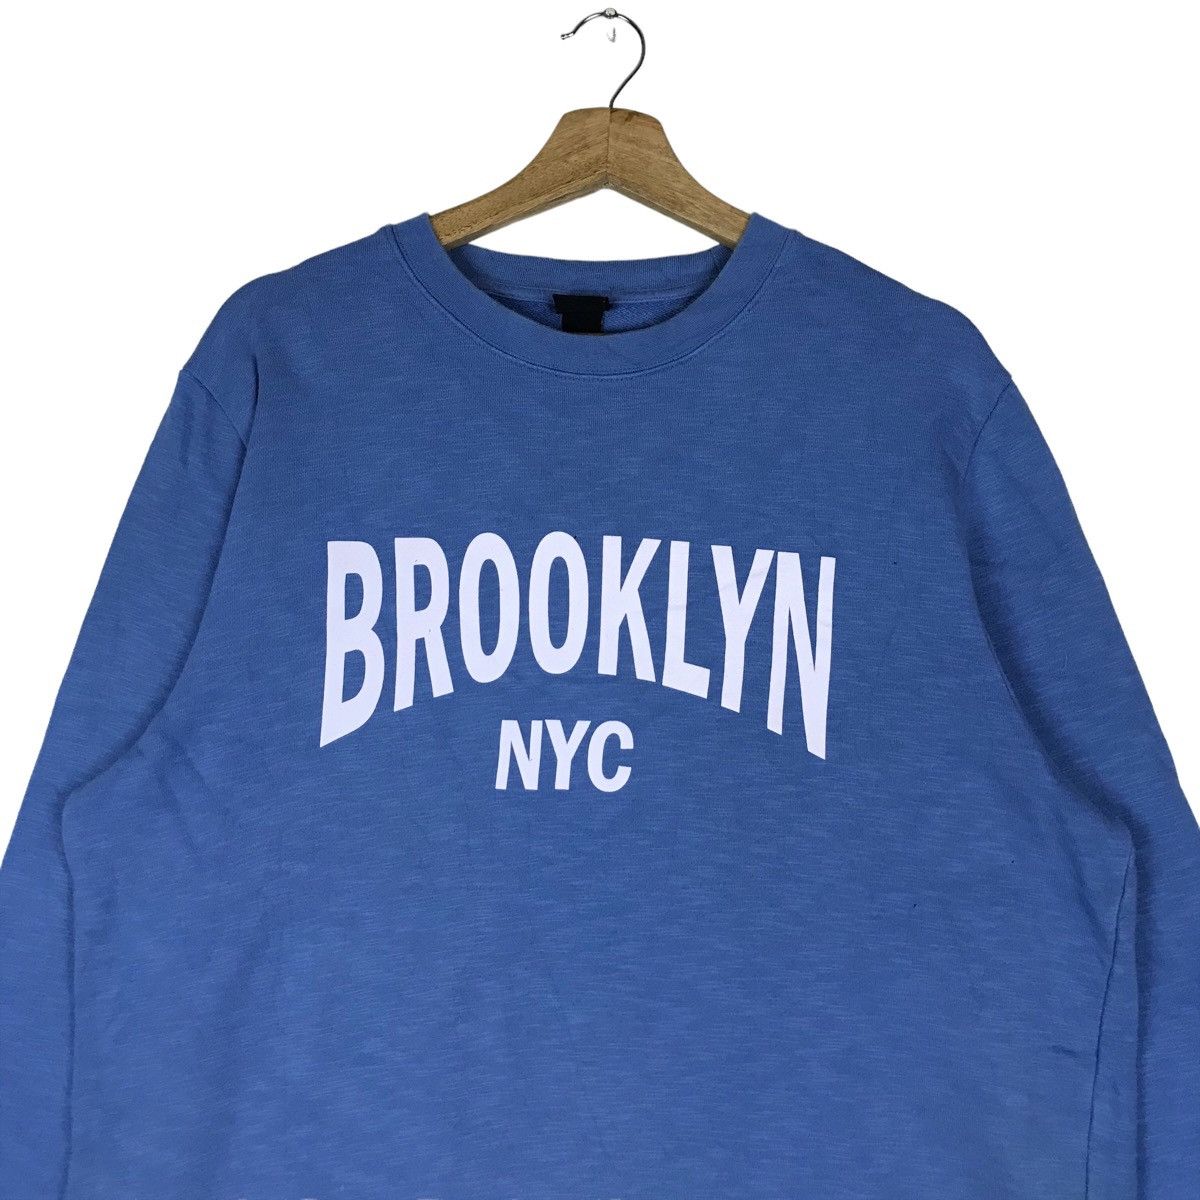 H&M Hennes and Mauritz H&M Brooklyn NYC Spell Out Pullover Size US L / EU 52-54 / 3 - 2 Preview